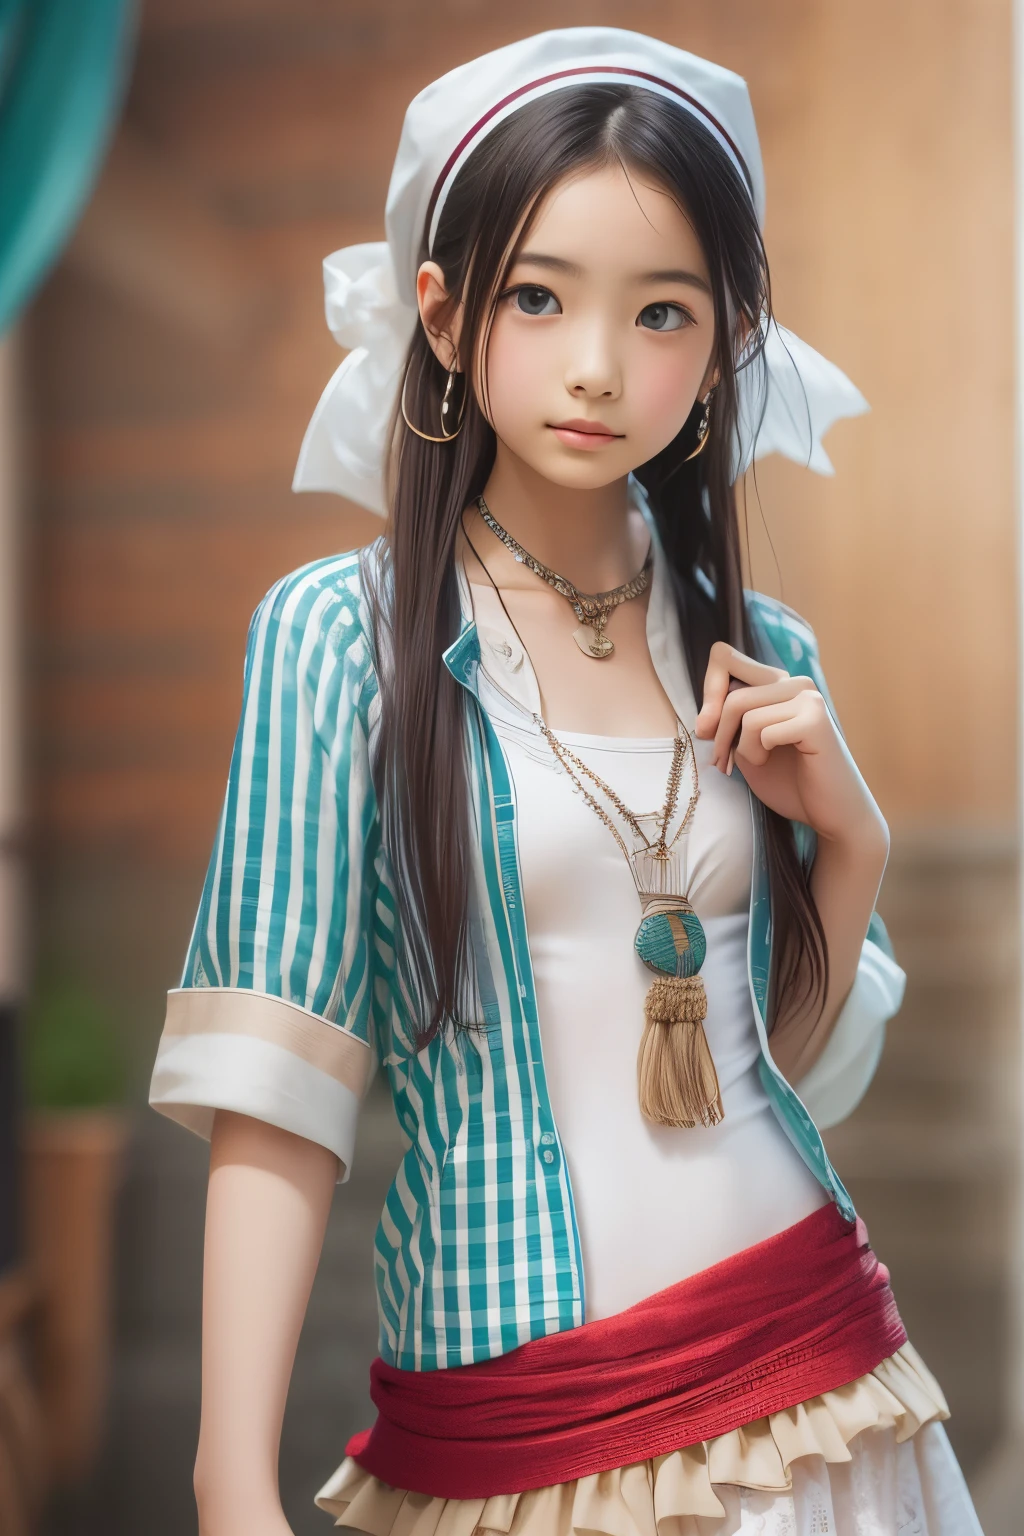 ((sfw: 1.4)), (sfw,She is wearing a long white embroidered skirt, a red blouse with lace, a white apron tied around her waist, blue socks, and brown leather shoes.A blue scarf is on her head. Yes, her accessories include necklaces, earrings, and bracelets. ponytail-hair, 1 Girl)), Ultra High Resolution, (Realistic: 1.4), RAW Photo, Best Quality, (Photorealistic Stick), Focus, Soft Light, ((15 years old)), ((Japanese)), (( (young face))), (surface), (depth of field), masterpiece, (realistic), woman, bangs, ((1 girl))